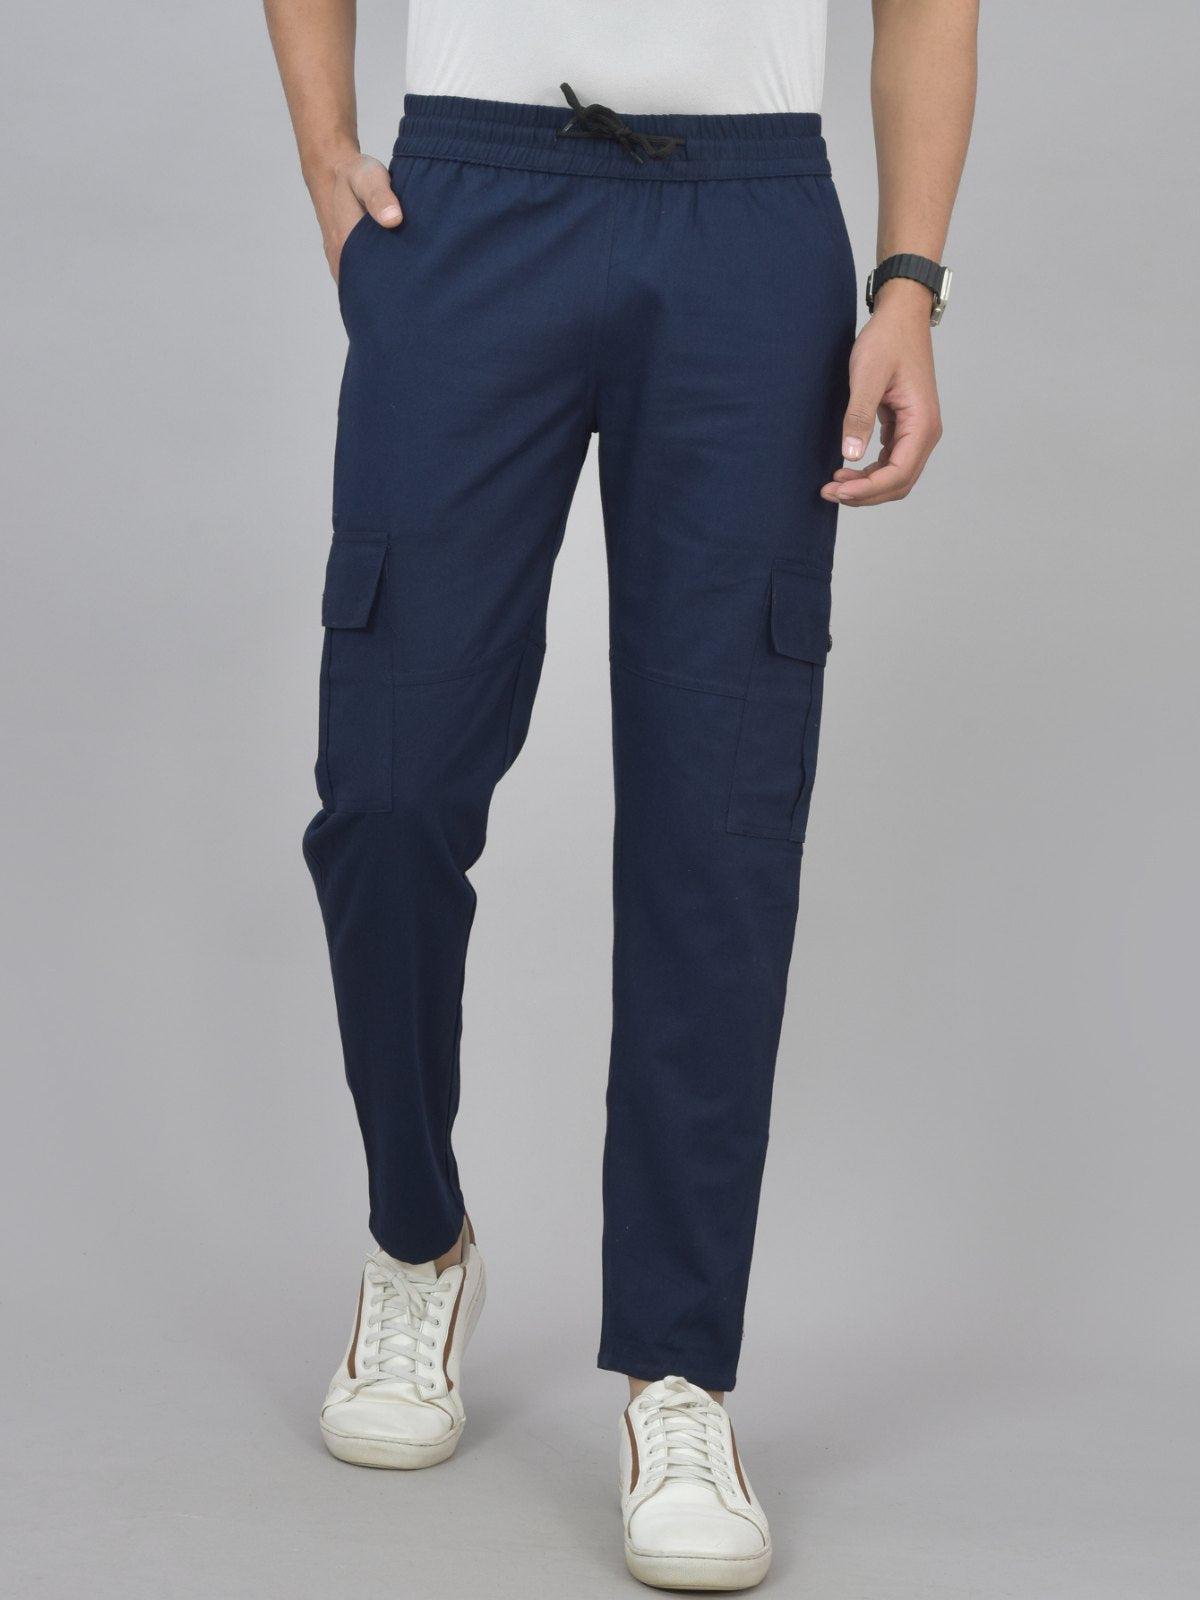 Pack Of 2 Mens Grey And Navy Blue Twill Straight Cargo Pants Combo